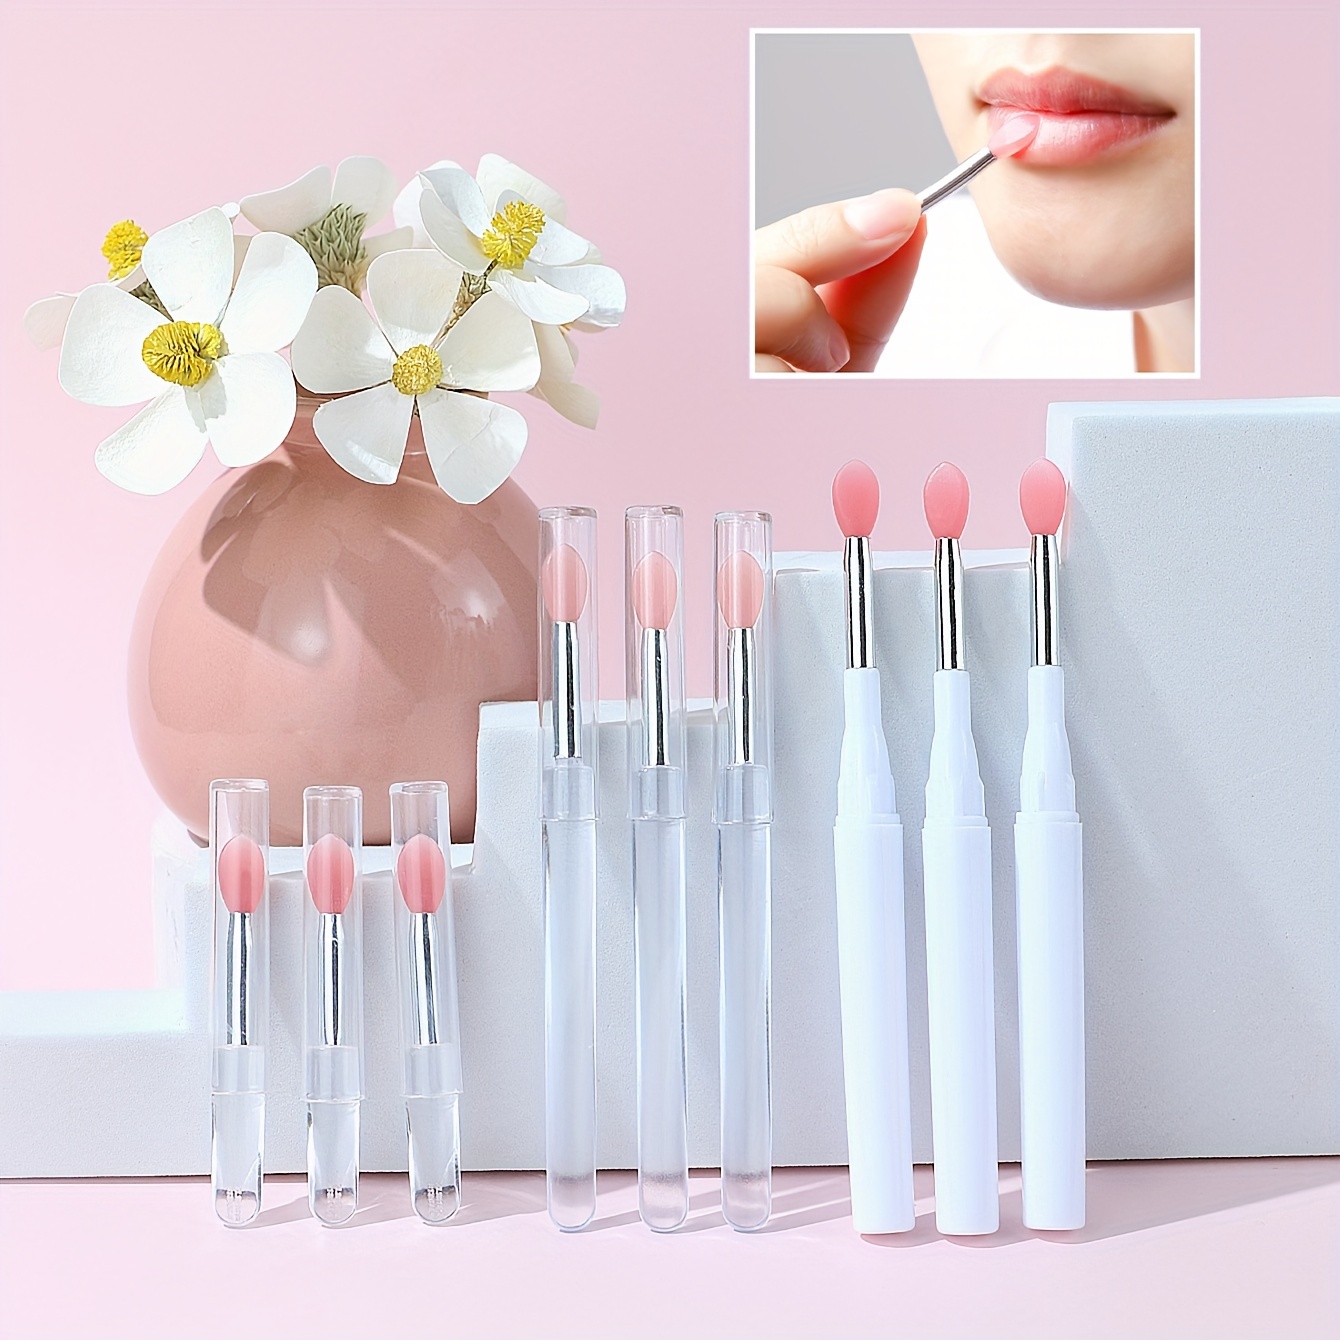 

3pcs Silicone Lip Makeup Brush With Dust Cap, Lipstick Stick Applicator, Suitable For Lip Gloss, Lip Mask, Eye Shadow, Lip Cream, Makeup Tools.